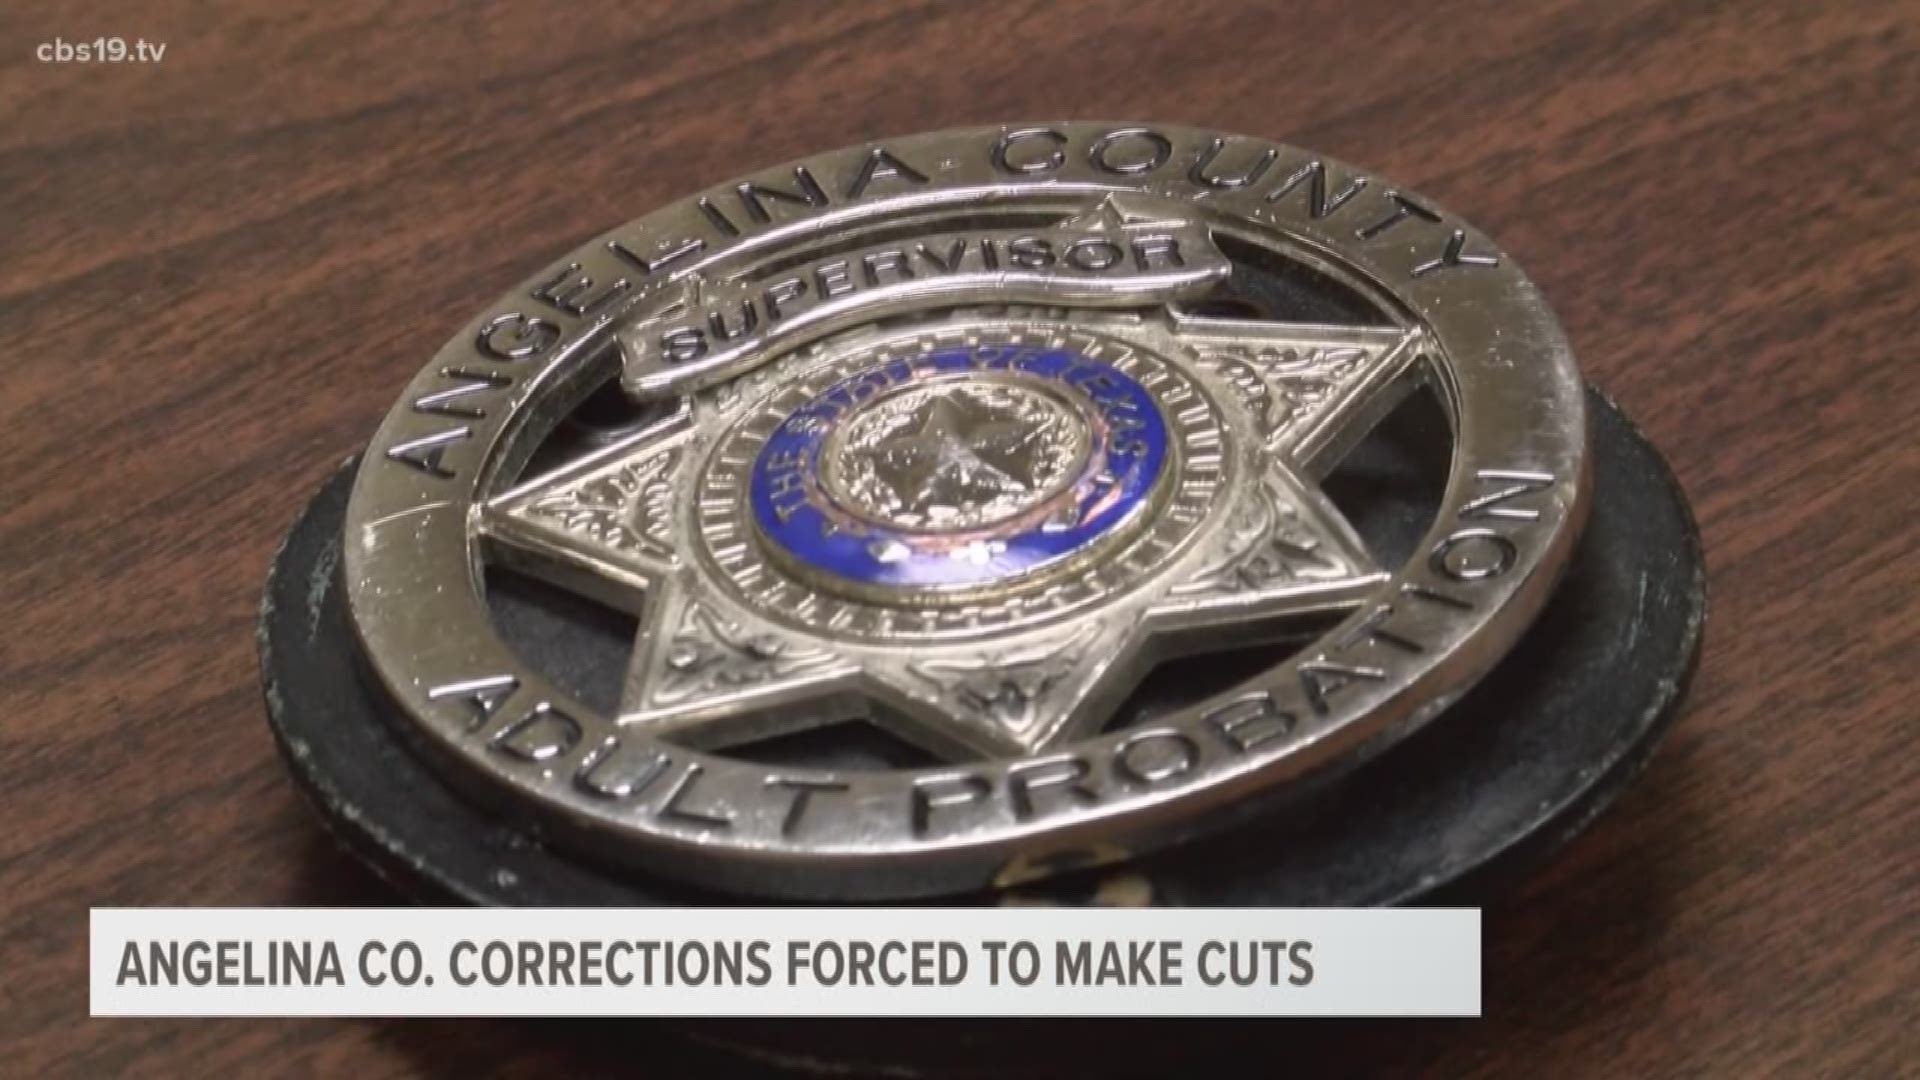 The Angelina County community supervision and corrections department has experienced a decrease in funding recently and has had to downsize.